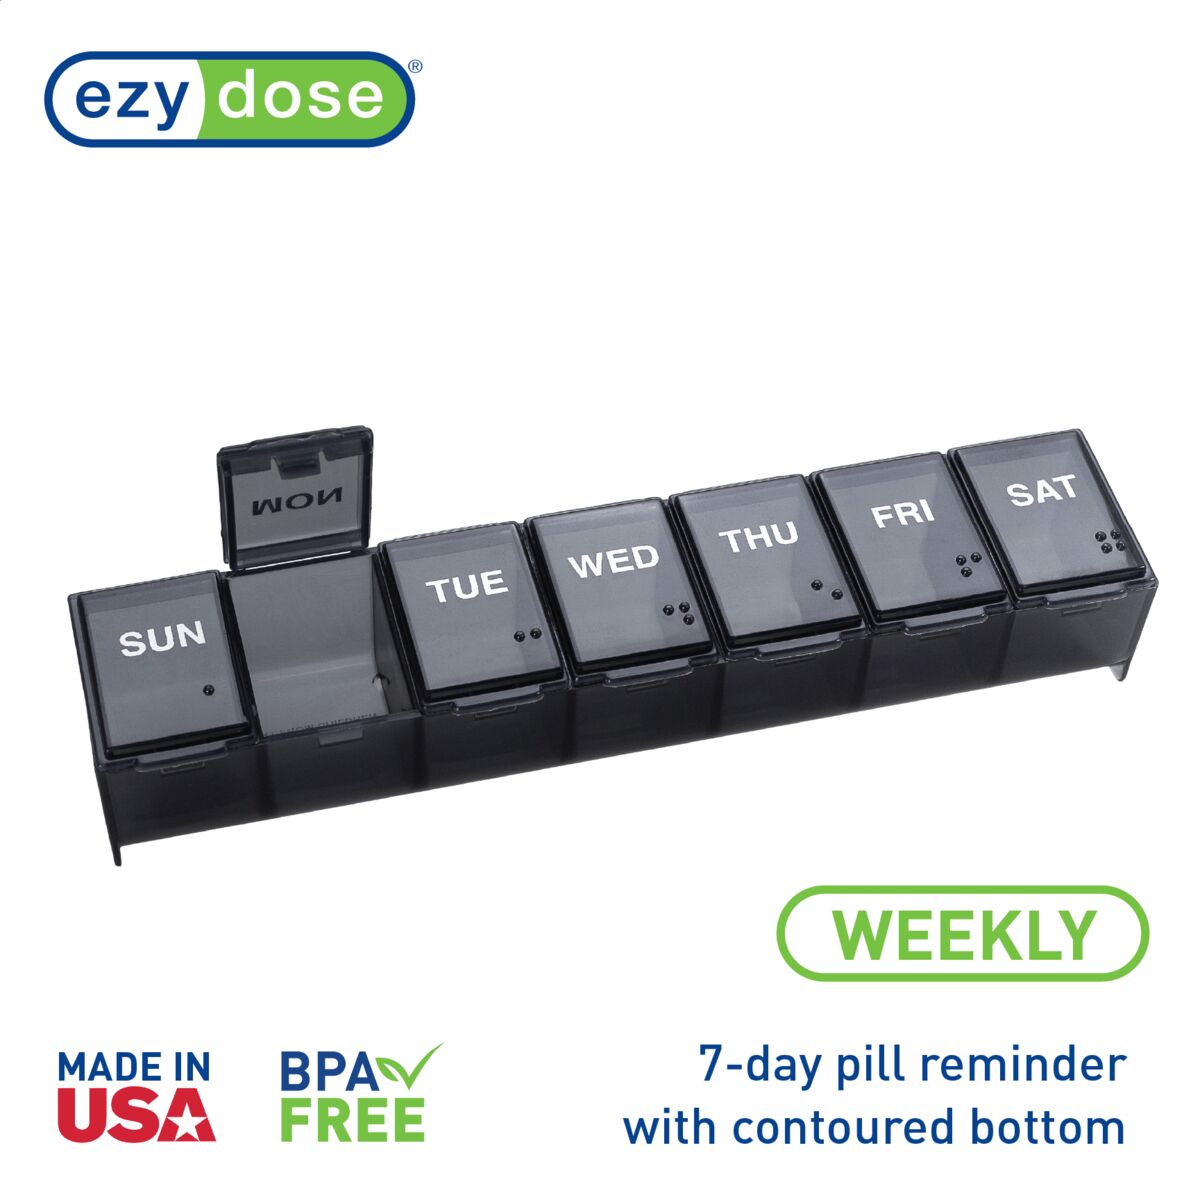 Weekly black pill organizer made in the USA and BPA free